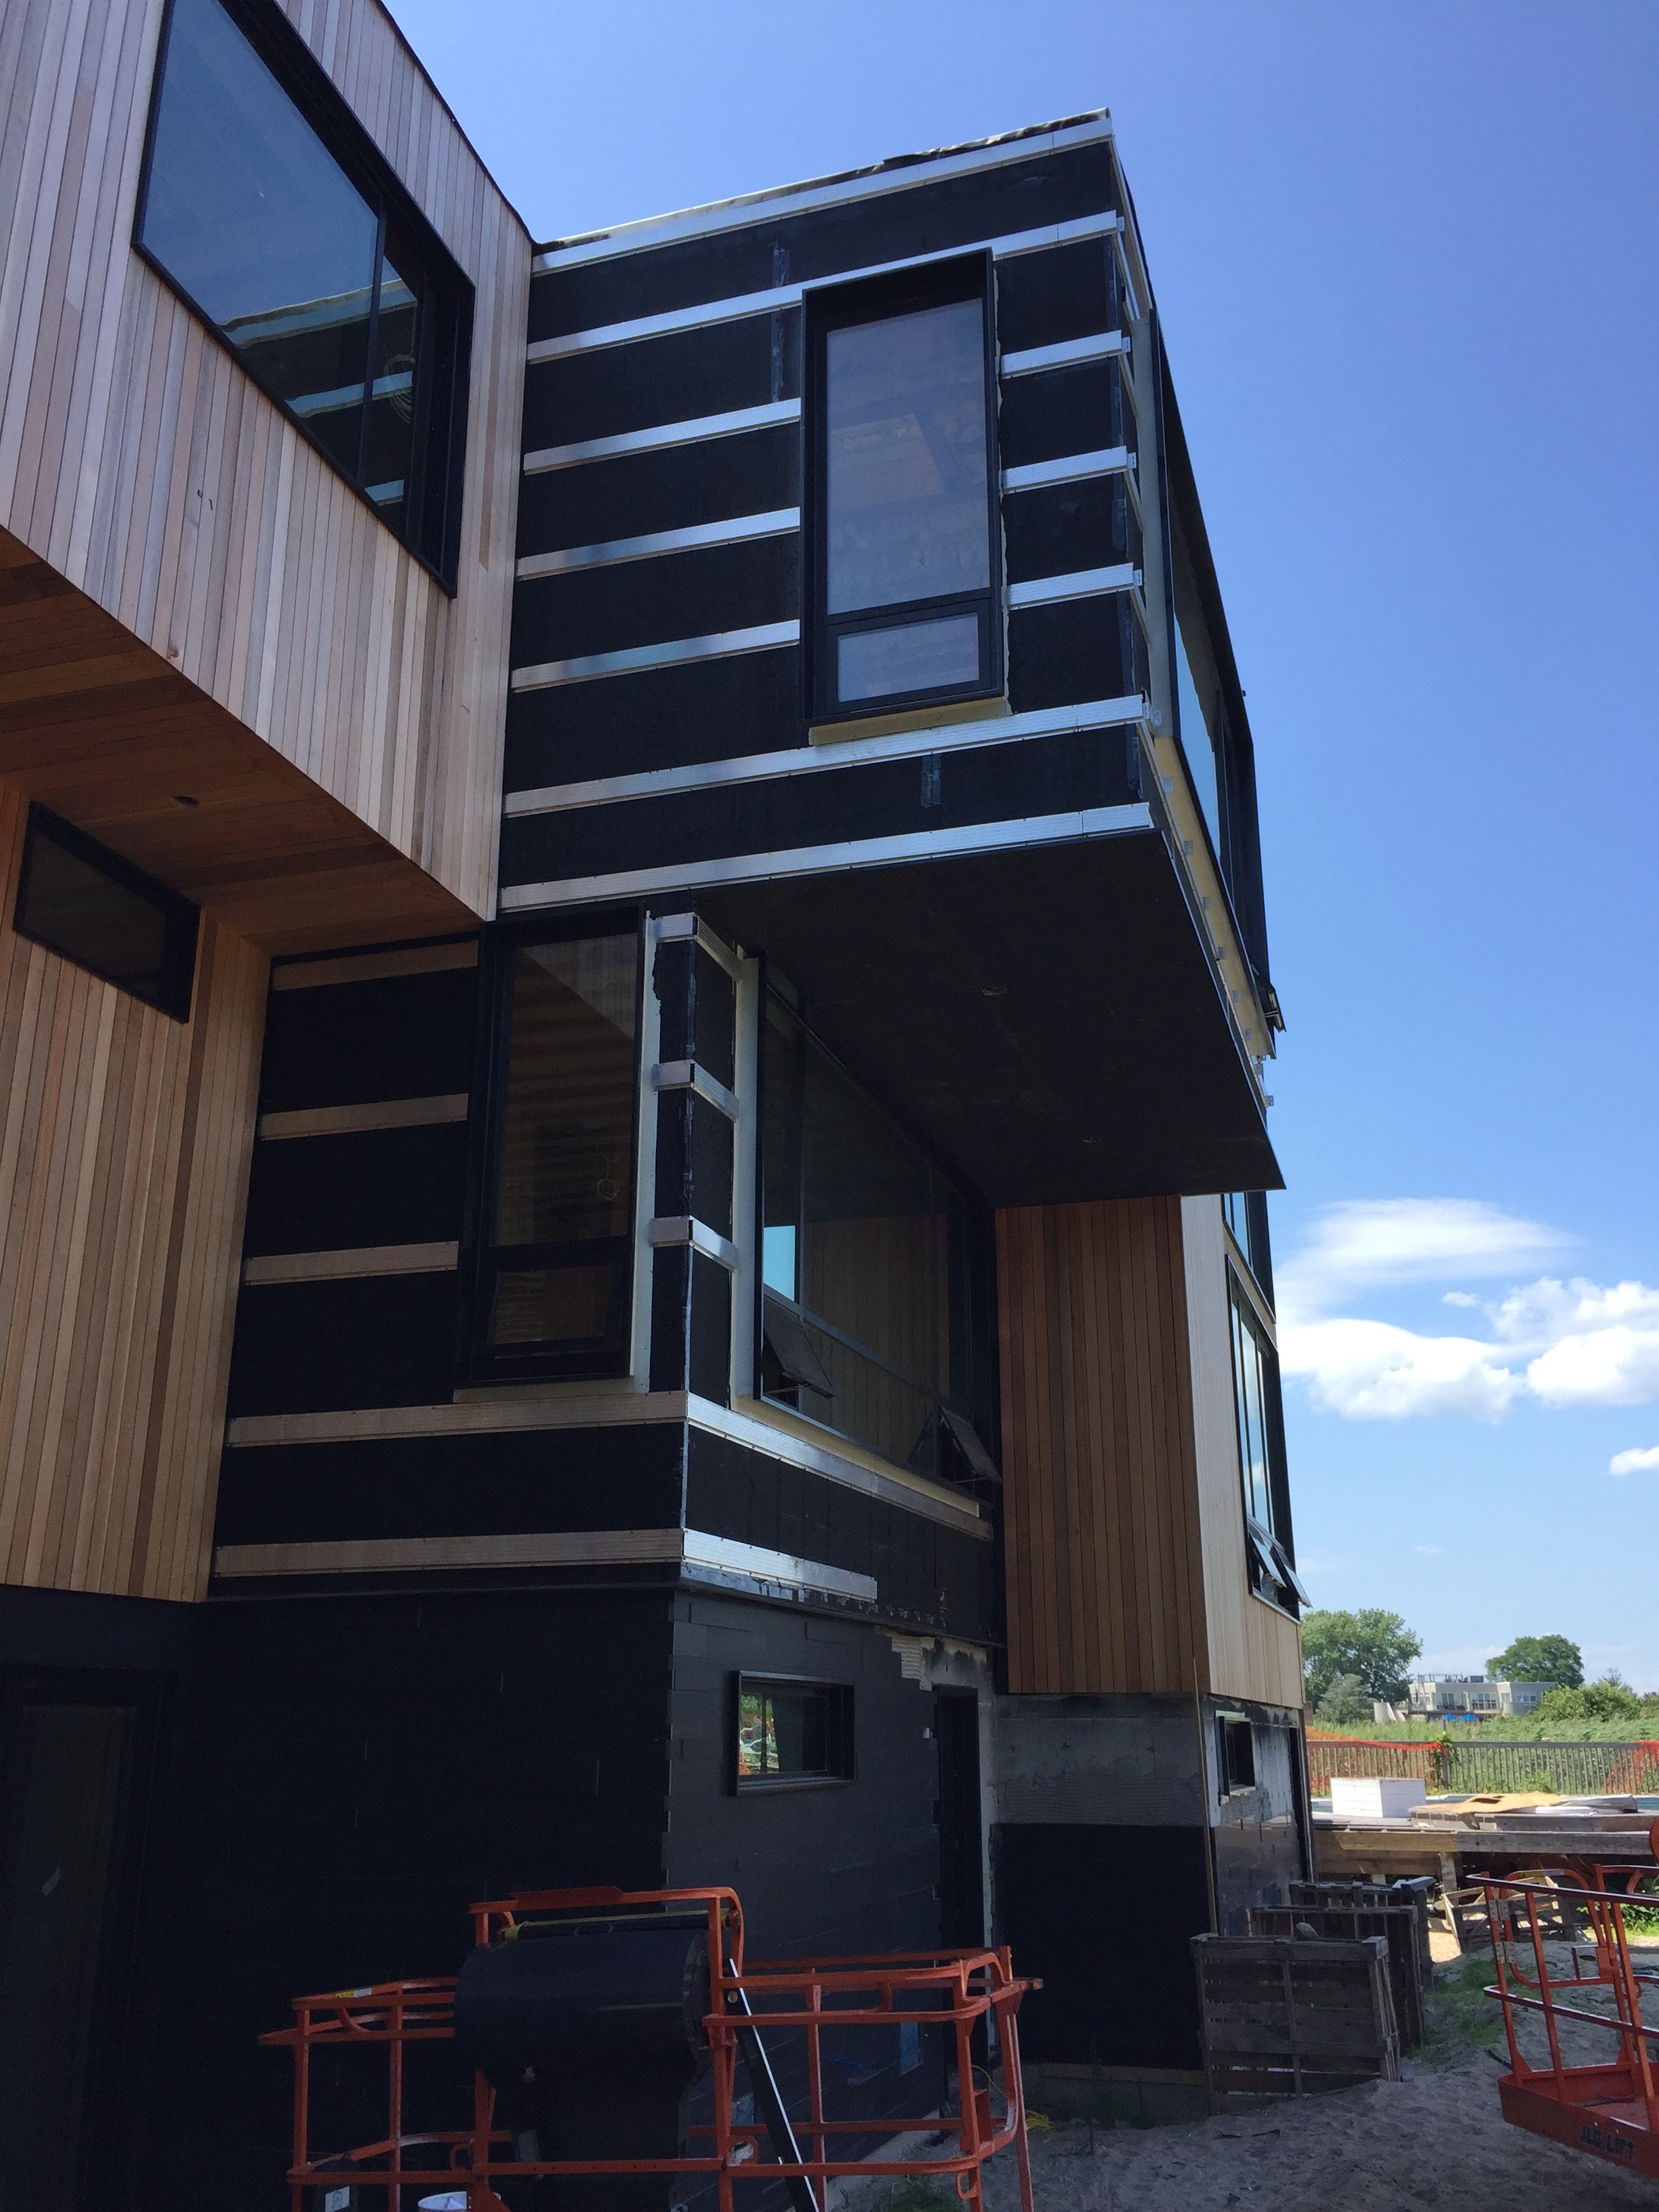 Norstone Ebony Planc on the exterior facade of a modern home in the hamptons showing outside corners